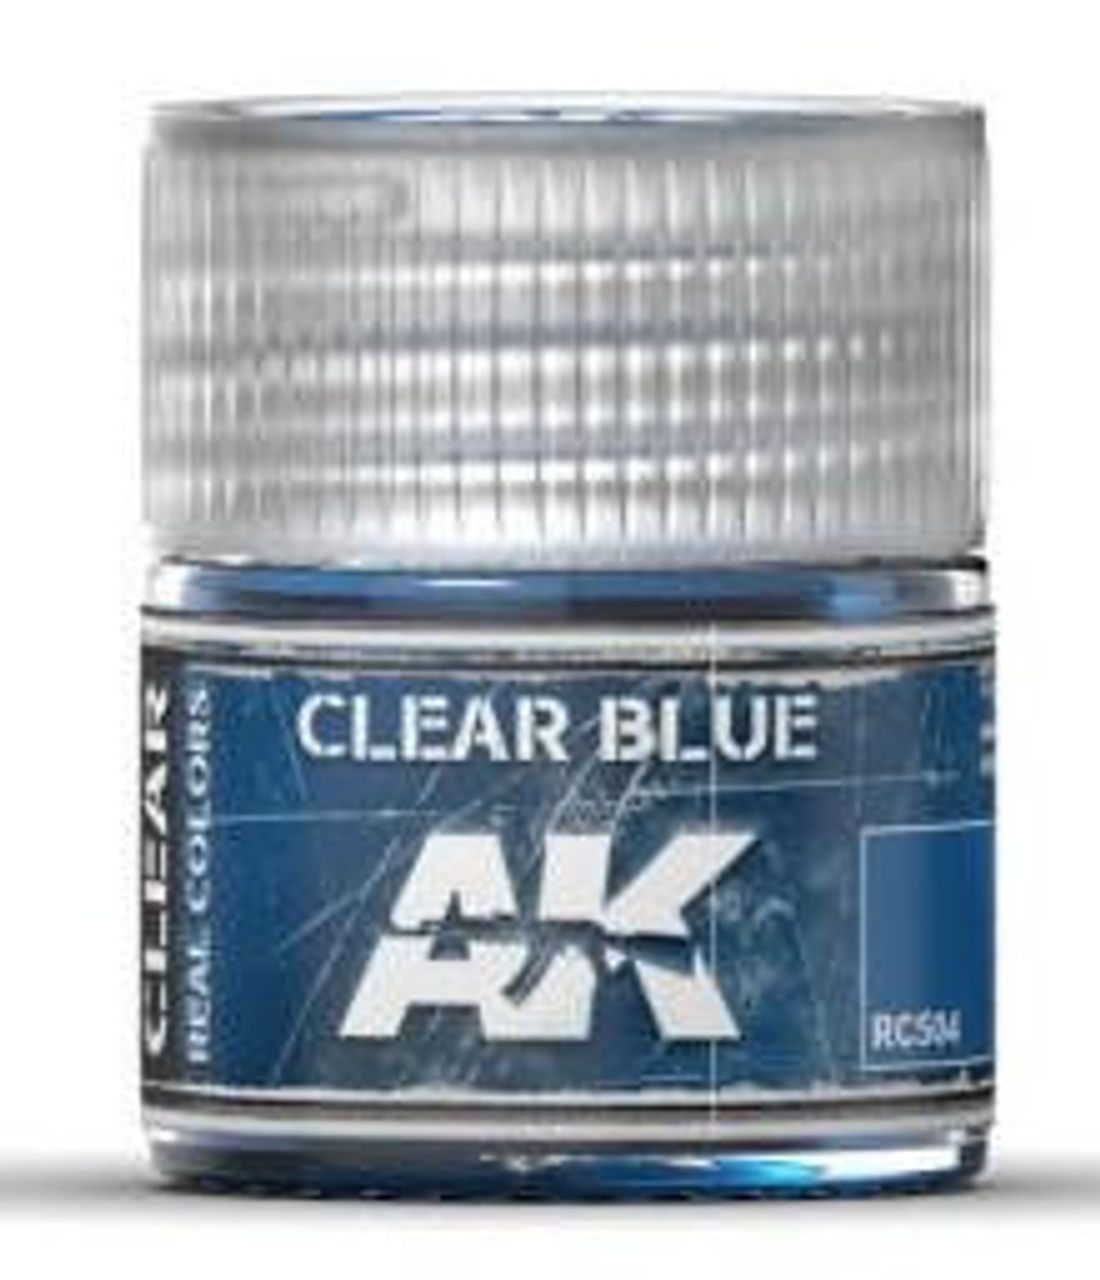 AK-RC504 AK Interactive Real Colors Clear Blue Acrylic Lacquer Paint 10ml Bottle  MMD Squadron